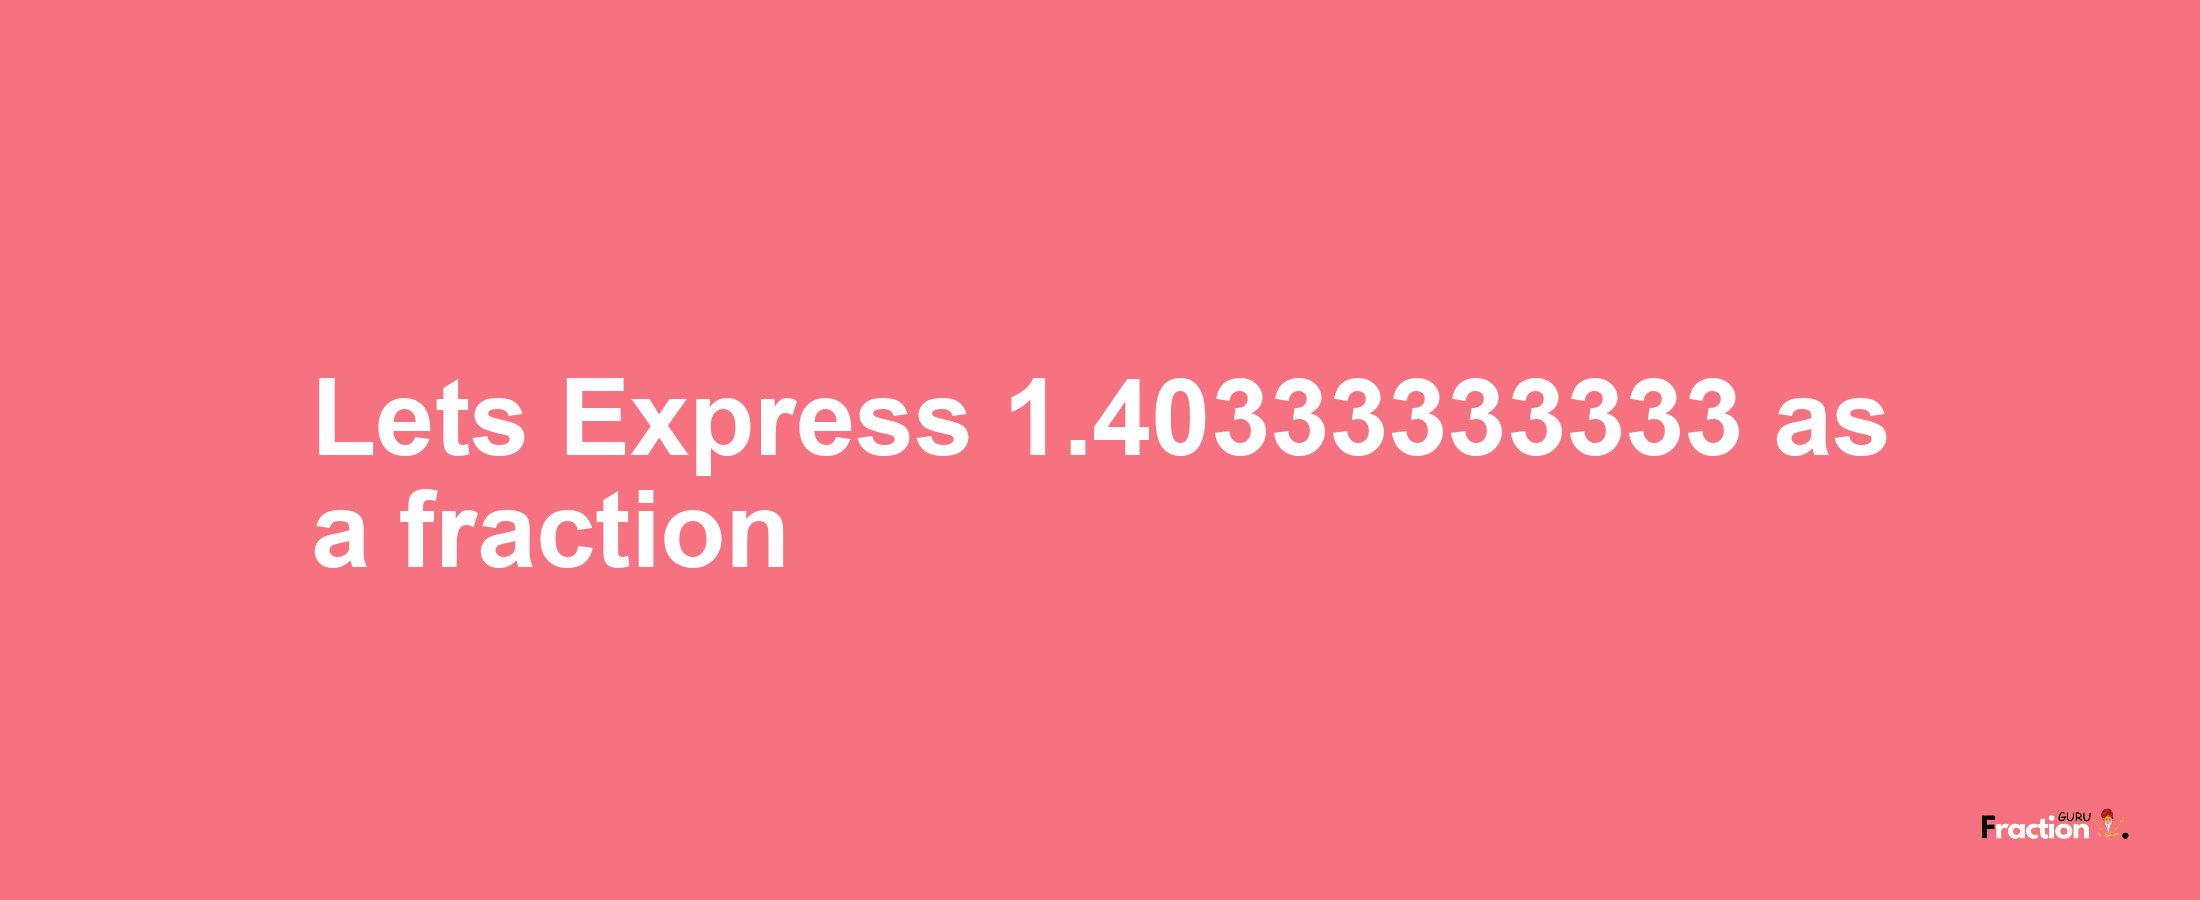 Lets Express 1.40333333333 as afraction